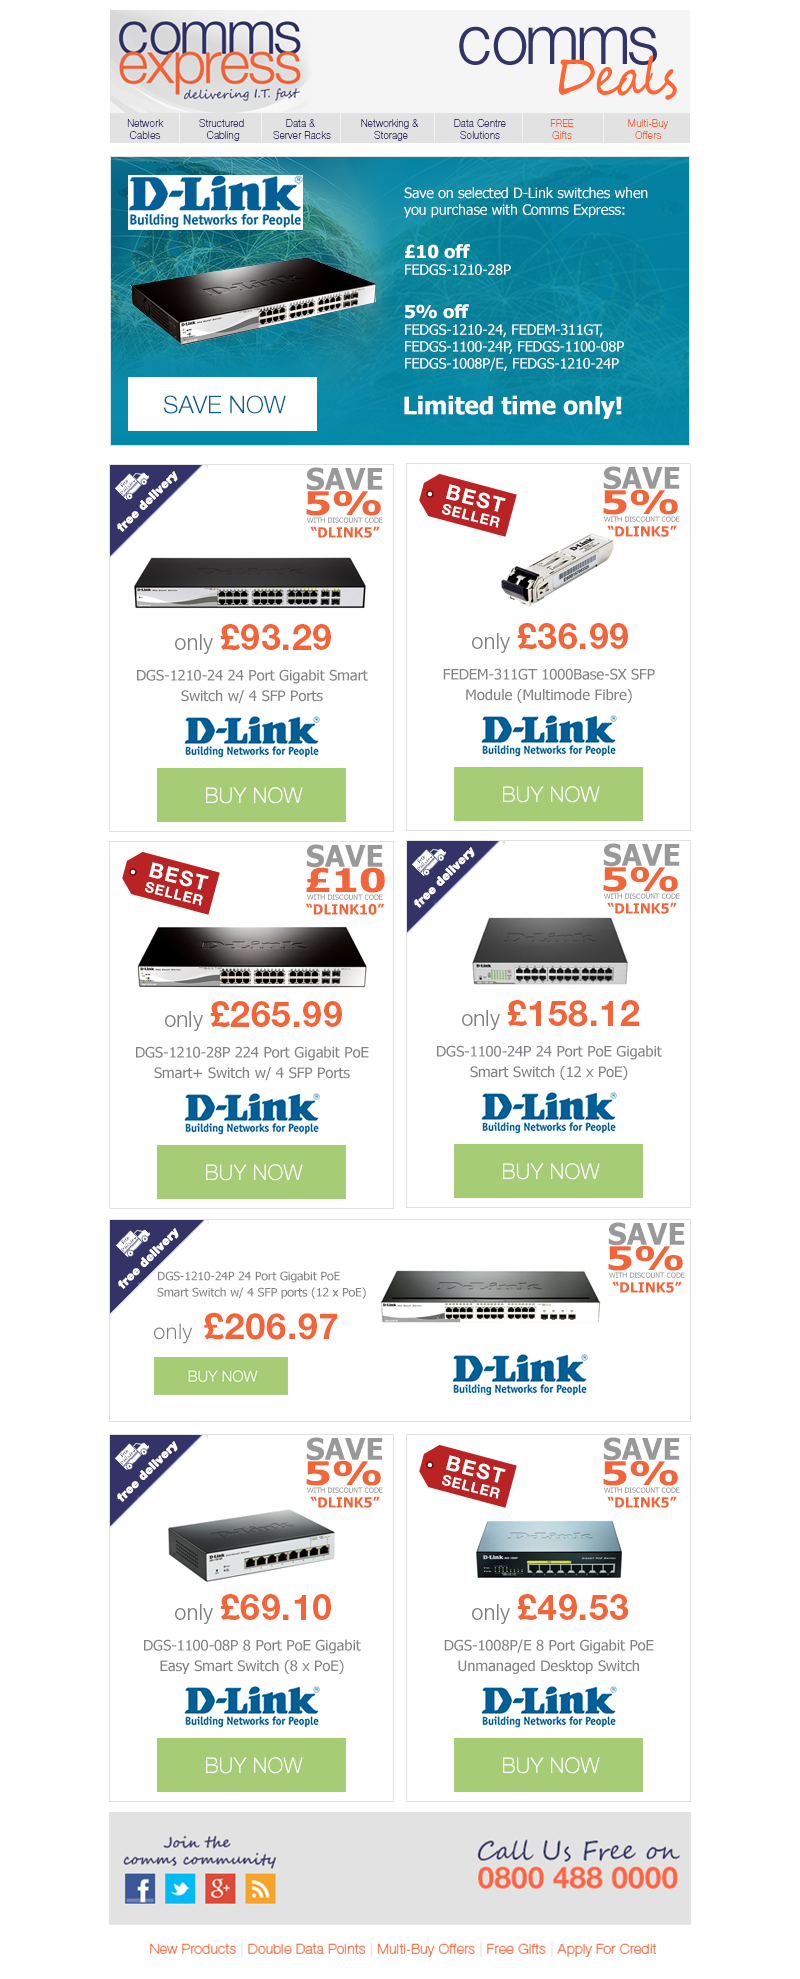 Comms Deals Save on selected DLink Switches with Comms